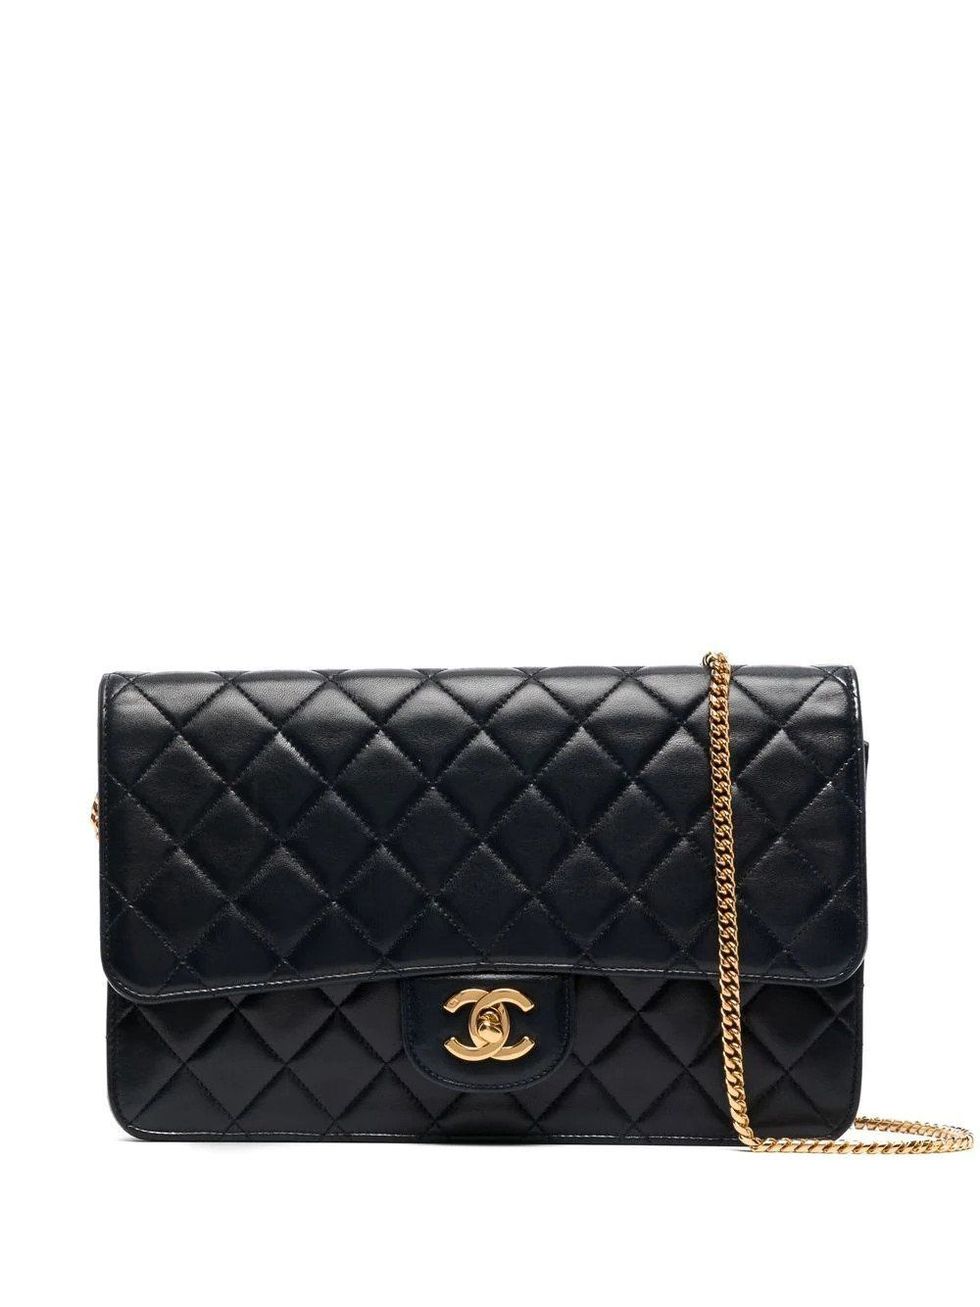 Chanel Handbags Are Discounted In The Farfetch Black Friday Sale